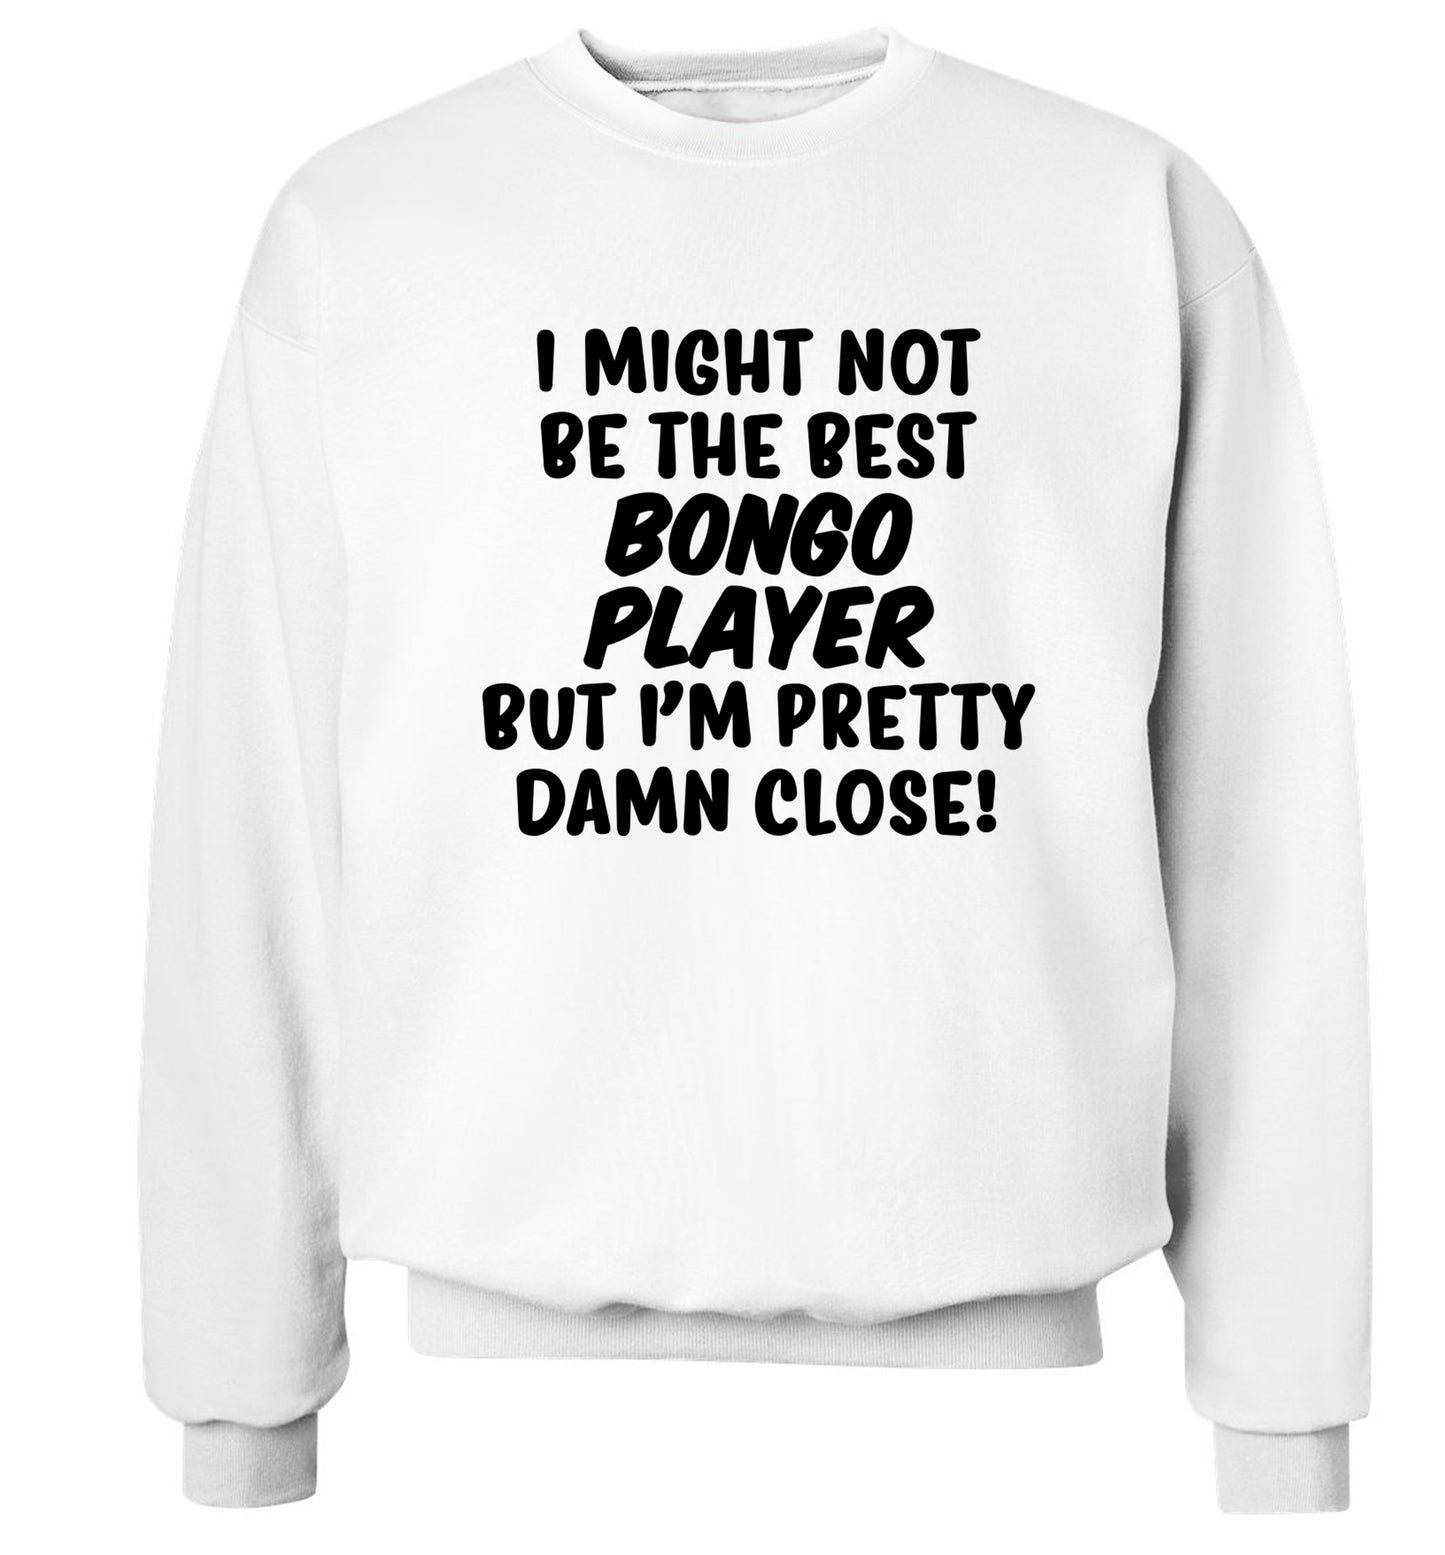 I might not be the best bongo player but I'm pretty close! Adult's unisexwhite Sweater 2XL